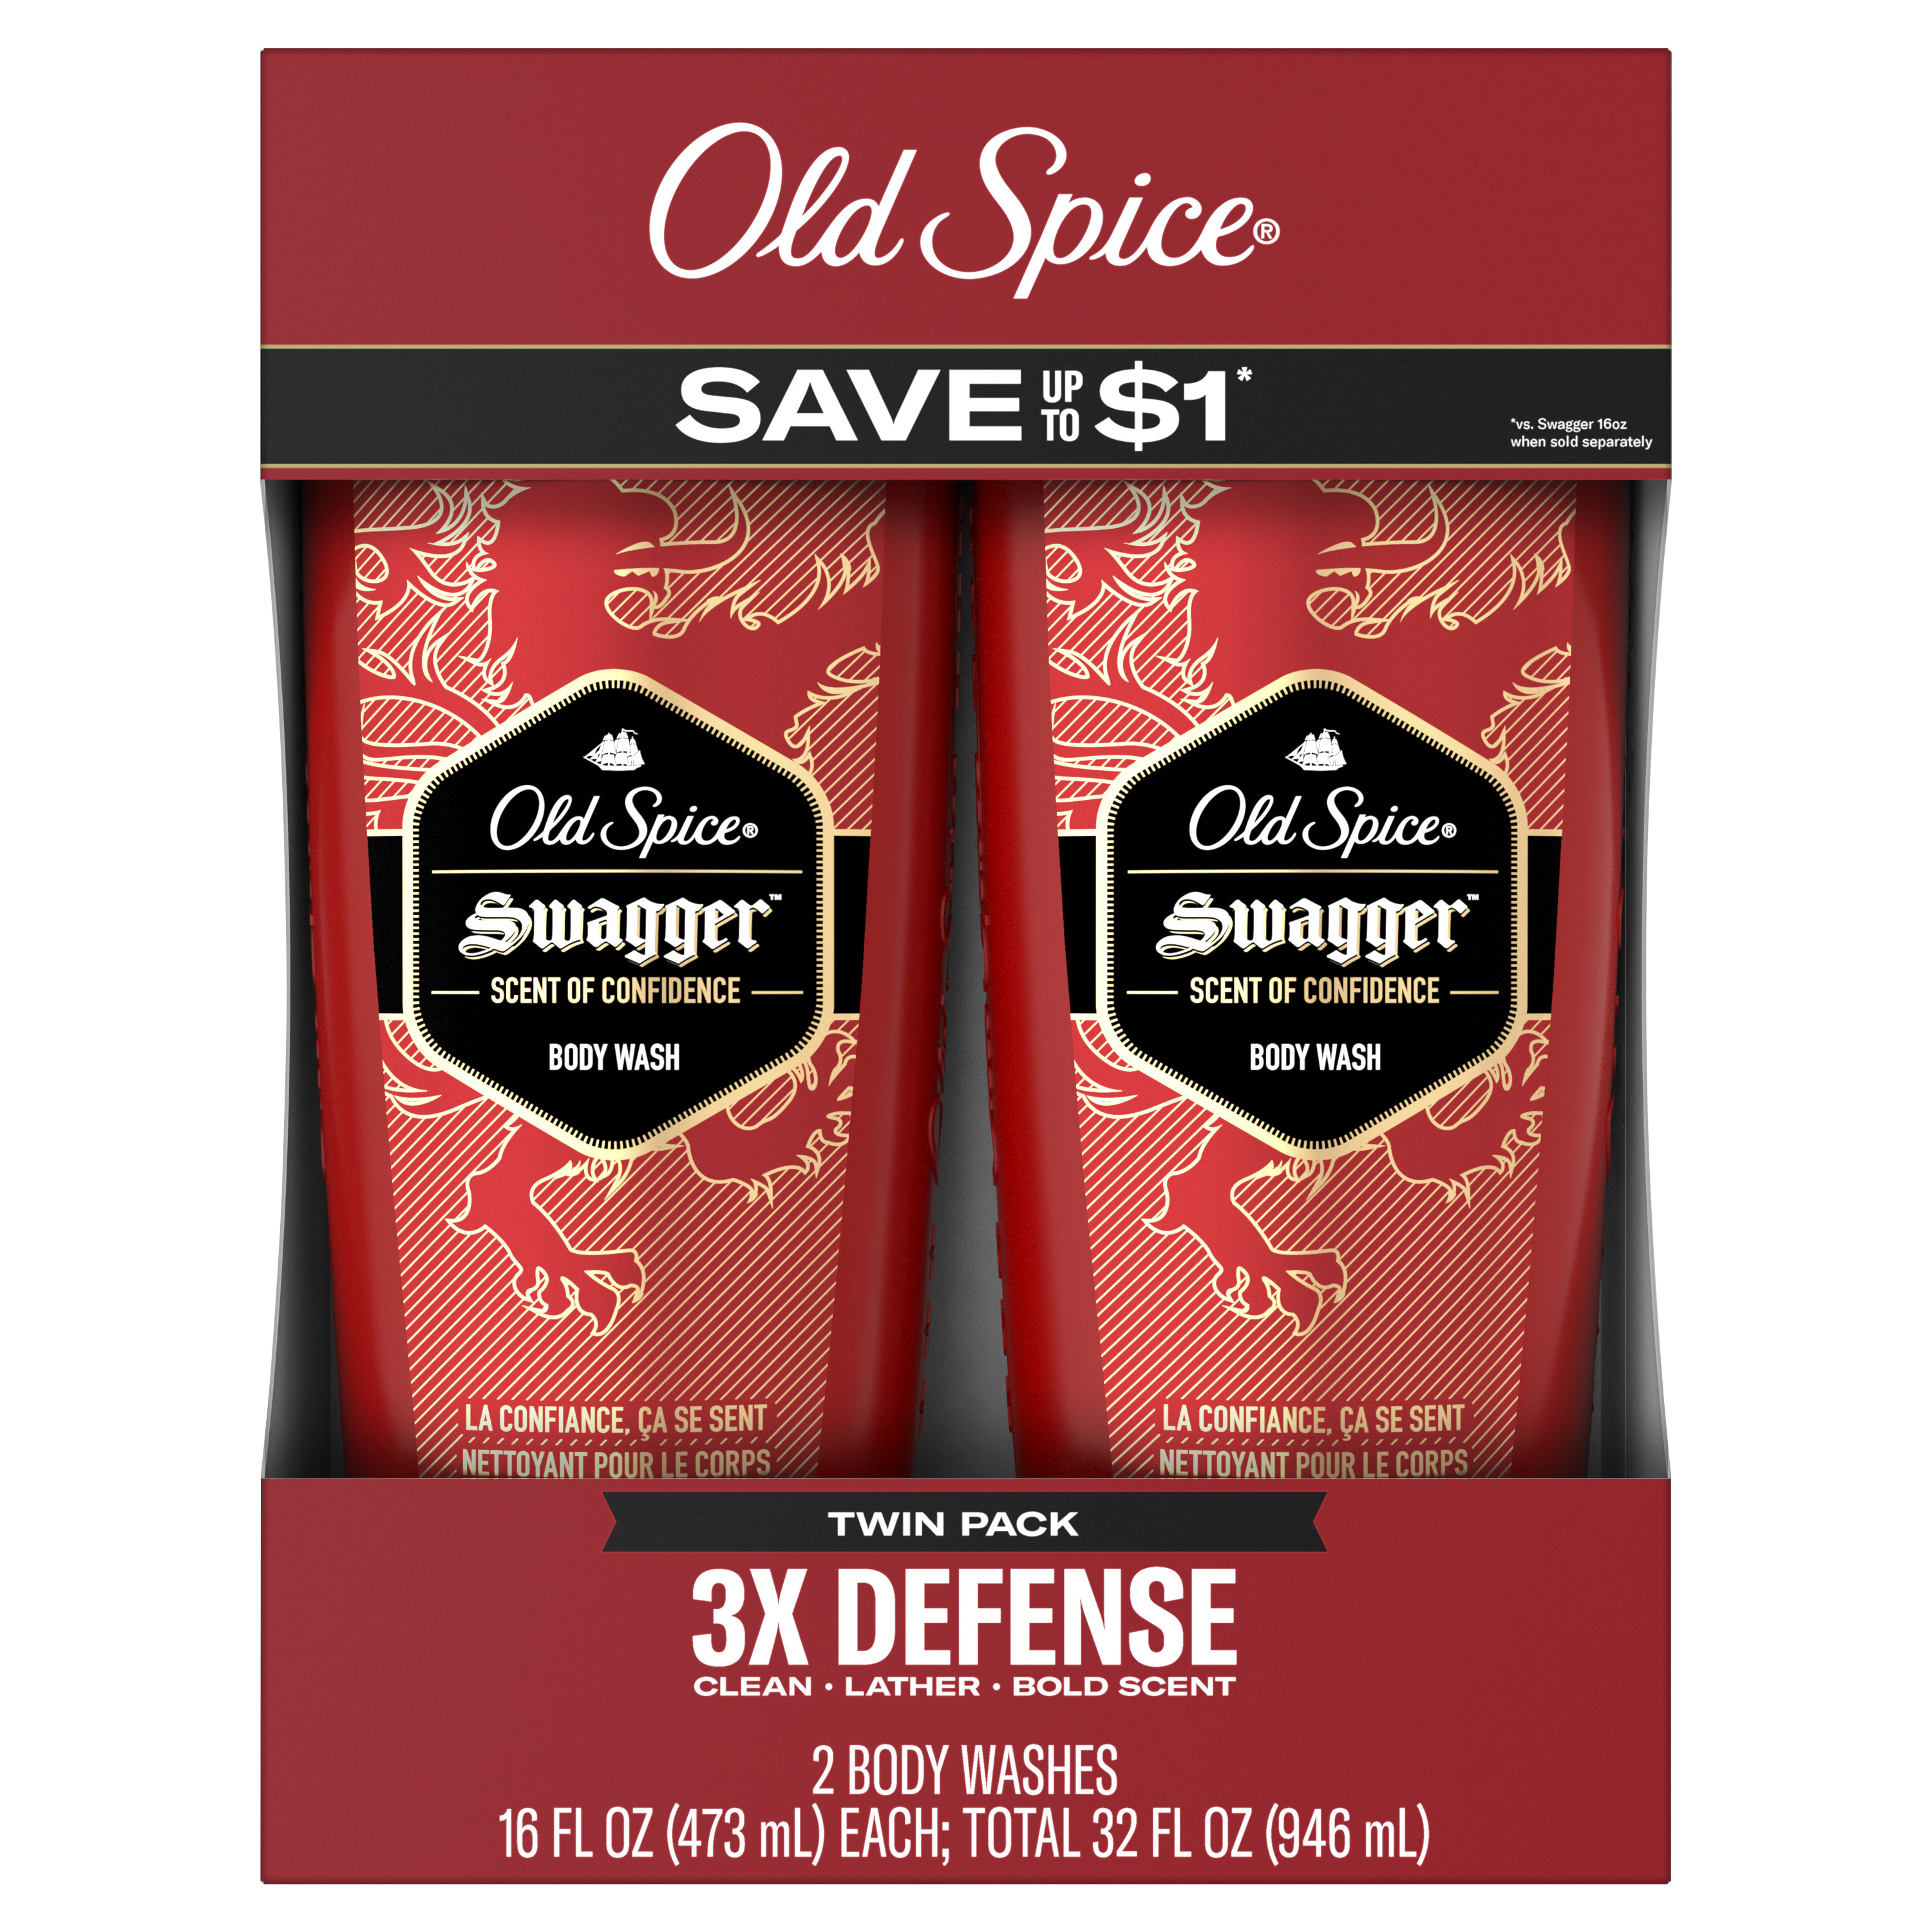 Old Spice Swagger Body Wash, 16 fl oz each, Pack of 2 - image 1 of 10